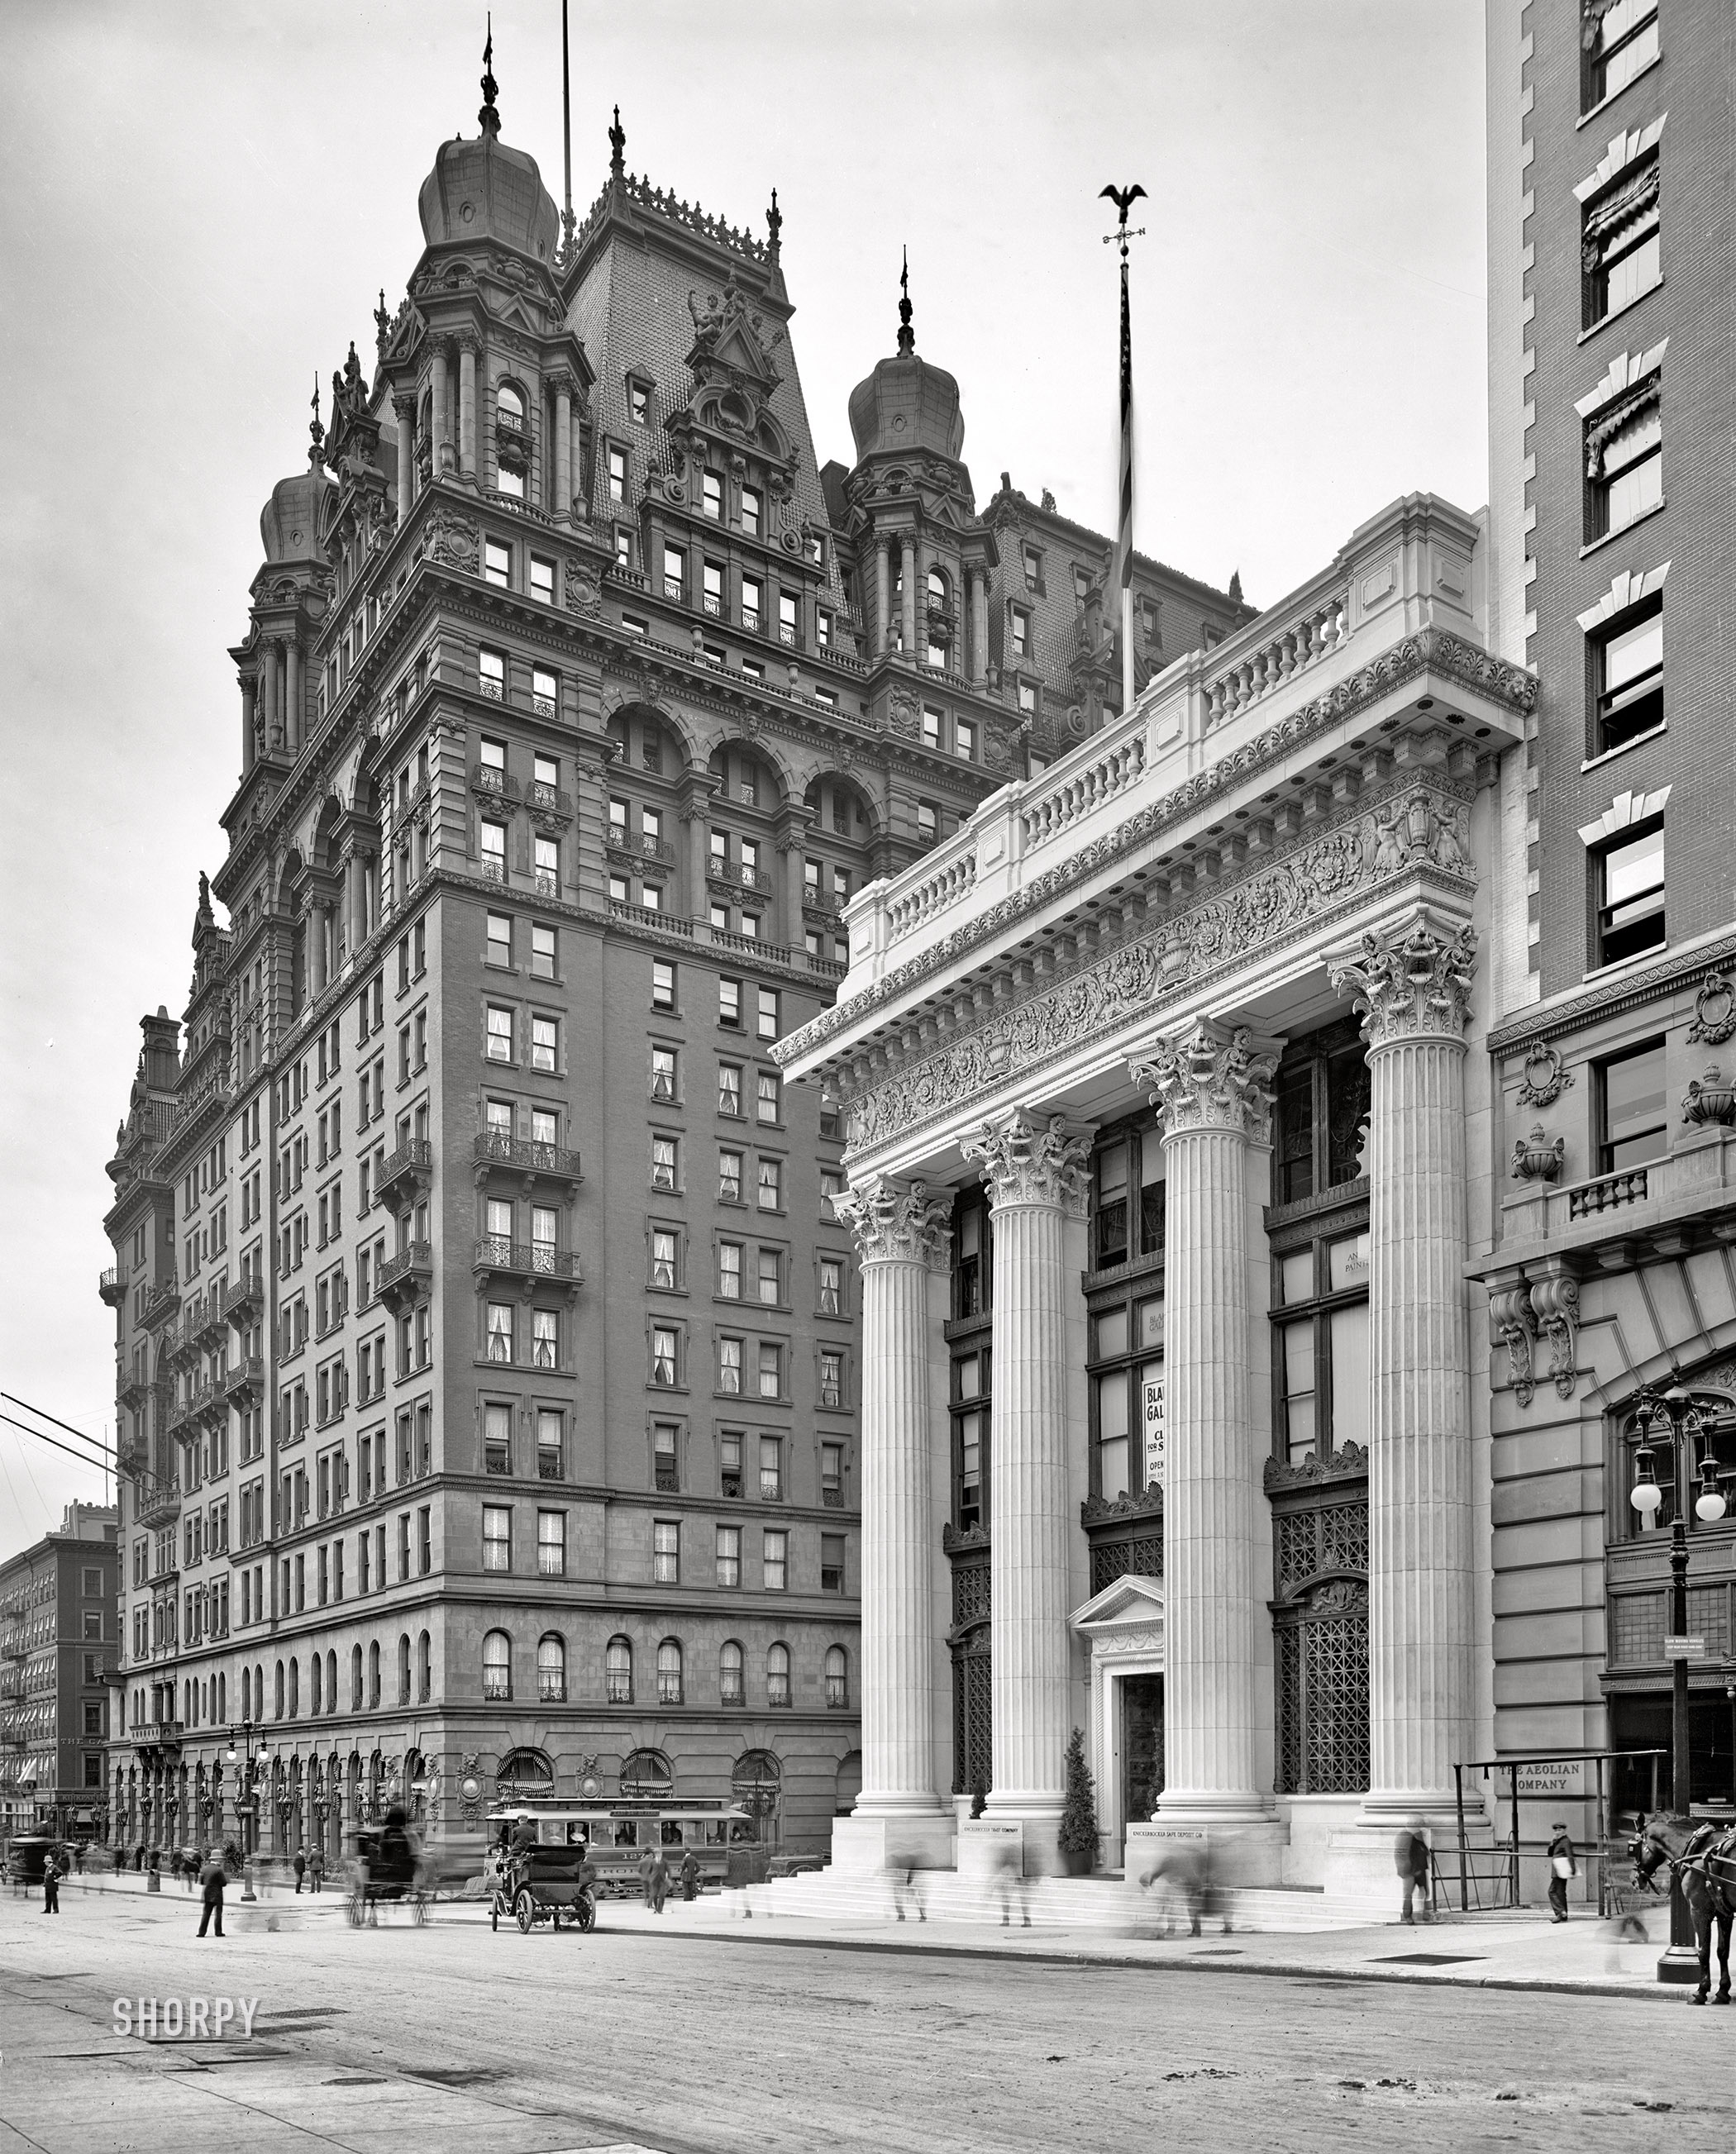 New York, 1904. "Knickerbocker Trust Building and Waldorf-Astoria Hotel, Fifth Avenue at W. 34th Street." 8x10 inch glass negative, Detroit Photographic Company. View full size.